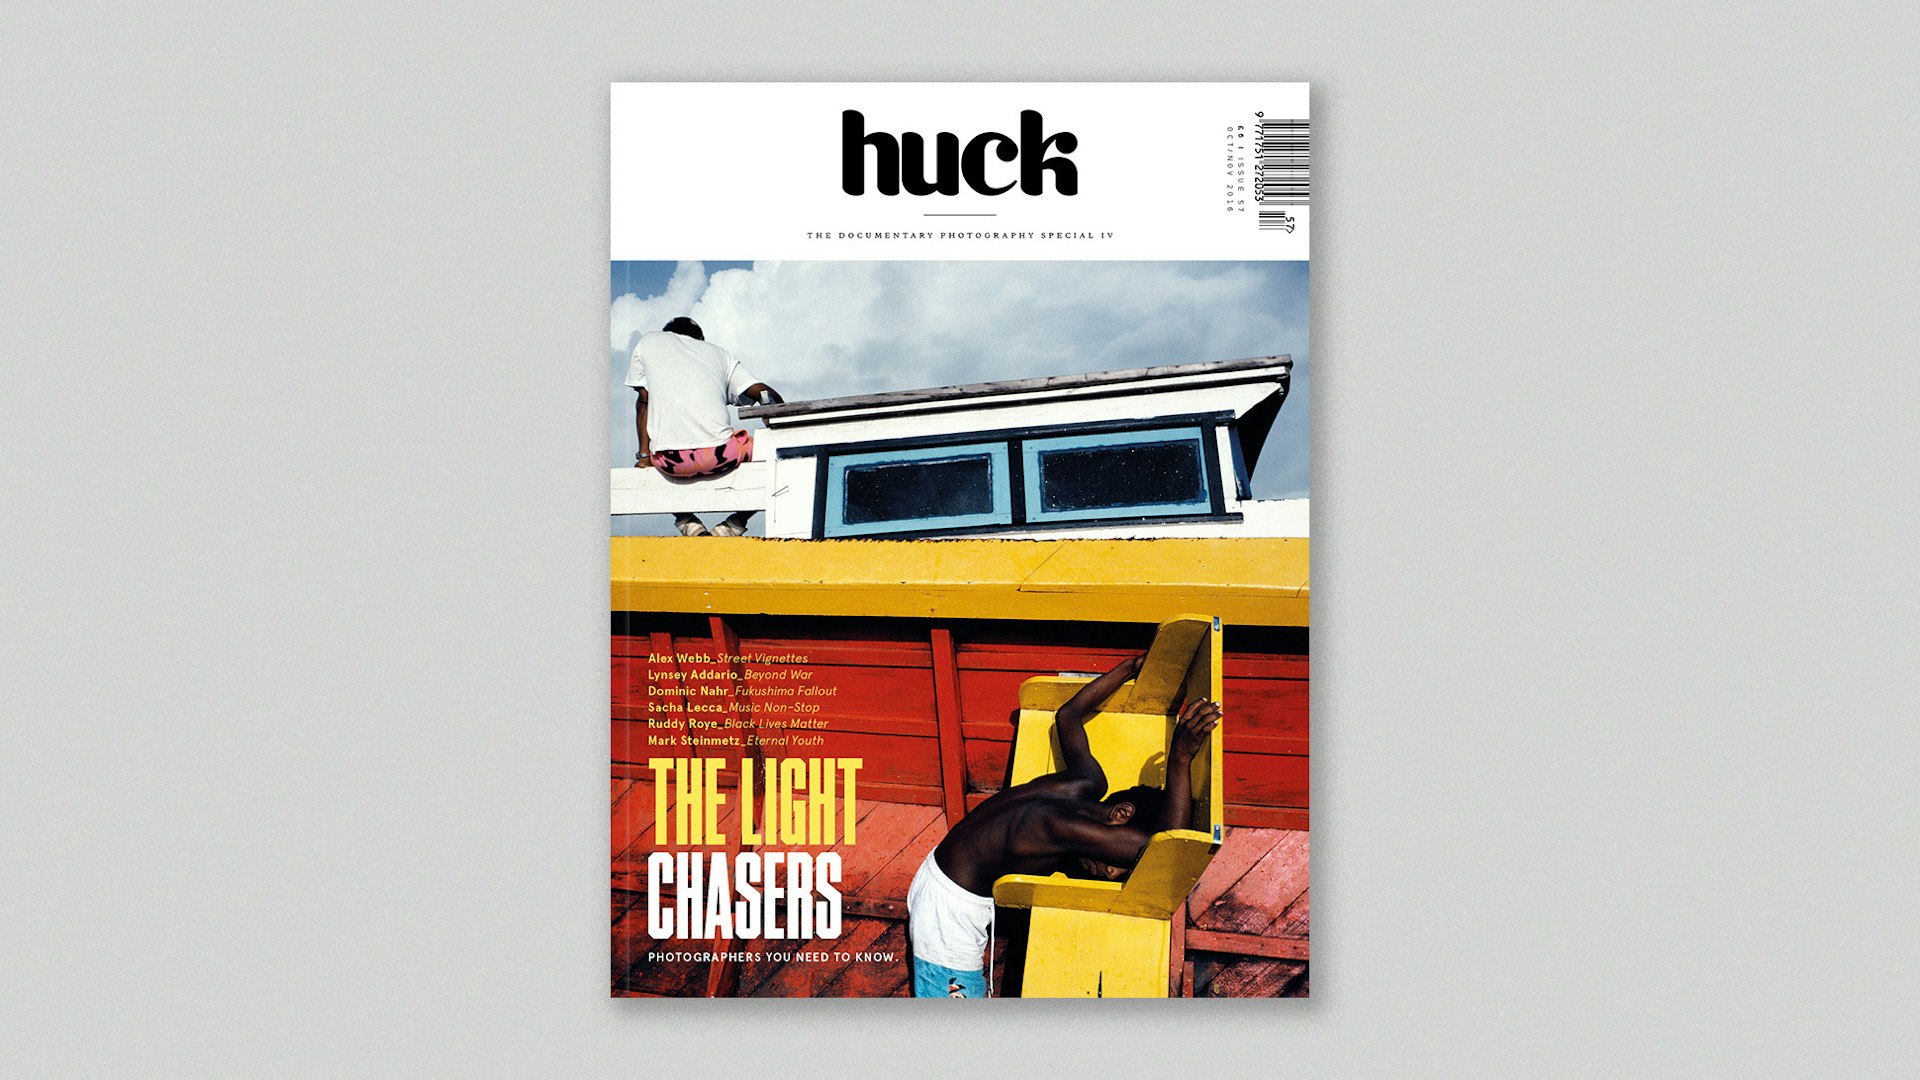 Huck 57: The Documentary Photo Special IV